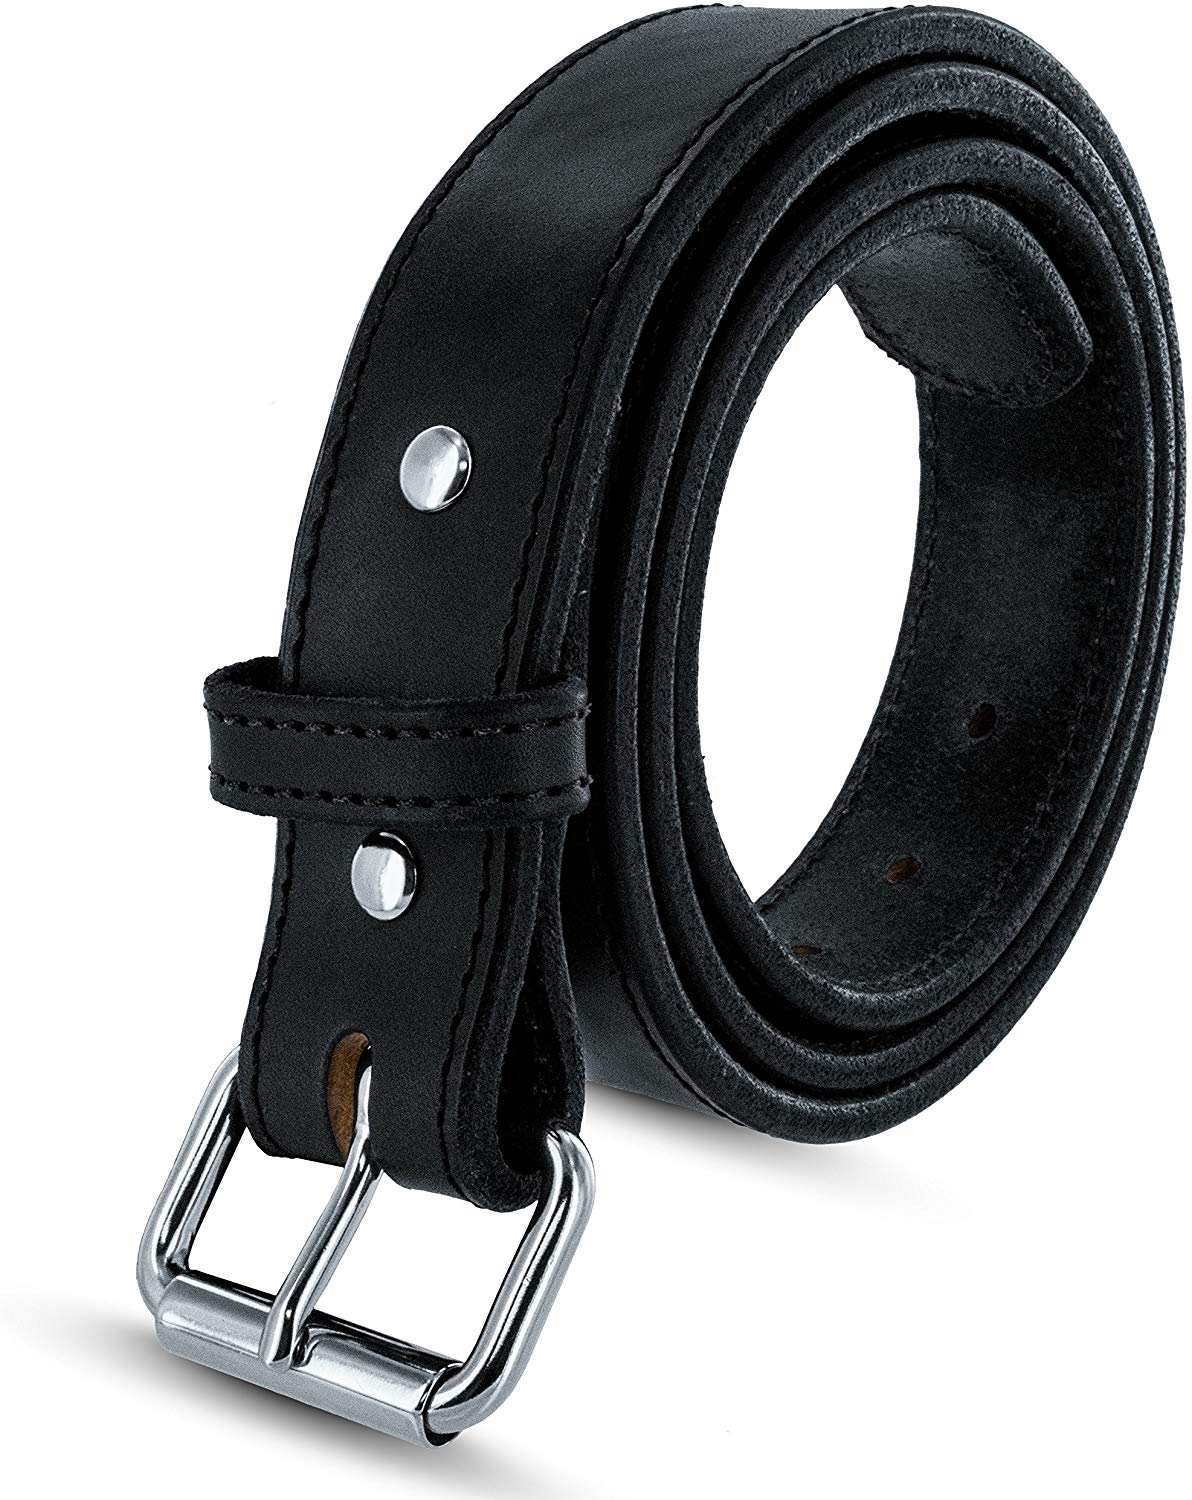 Hanks Extreme - Leather Gun Belt for CCW - Concealed Carry -